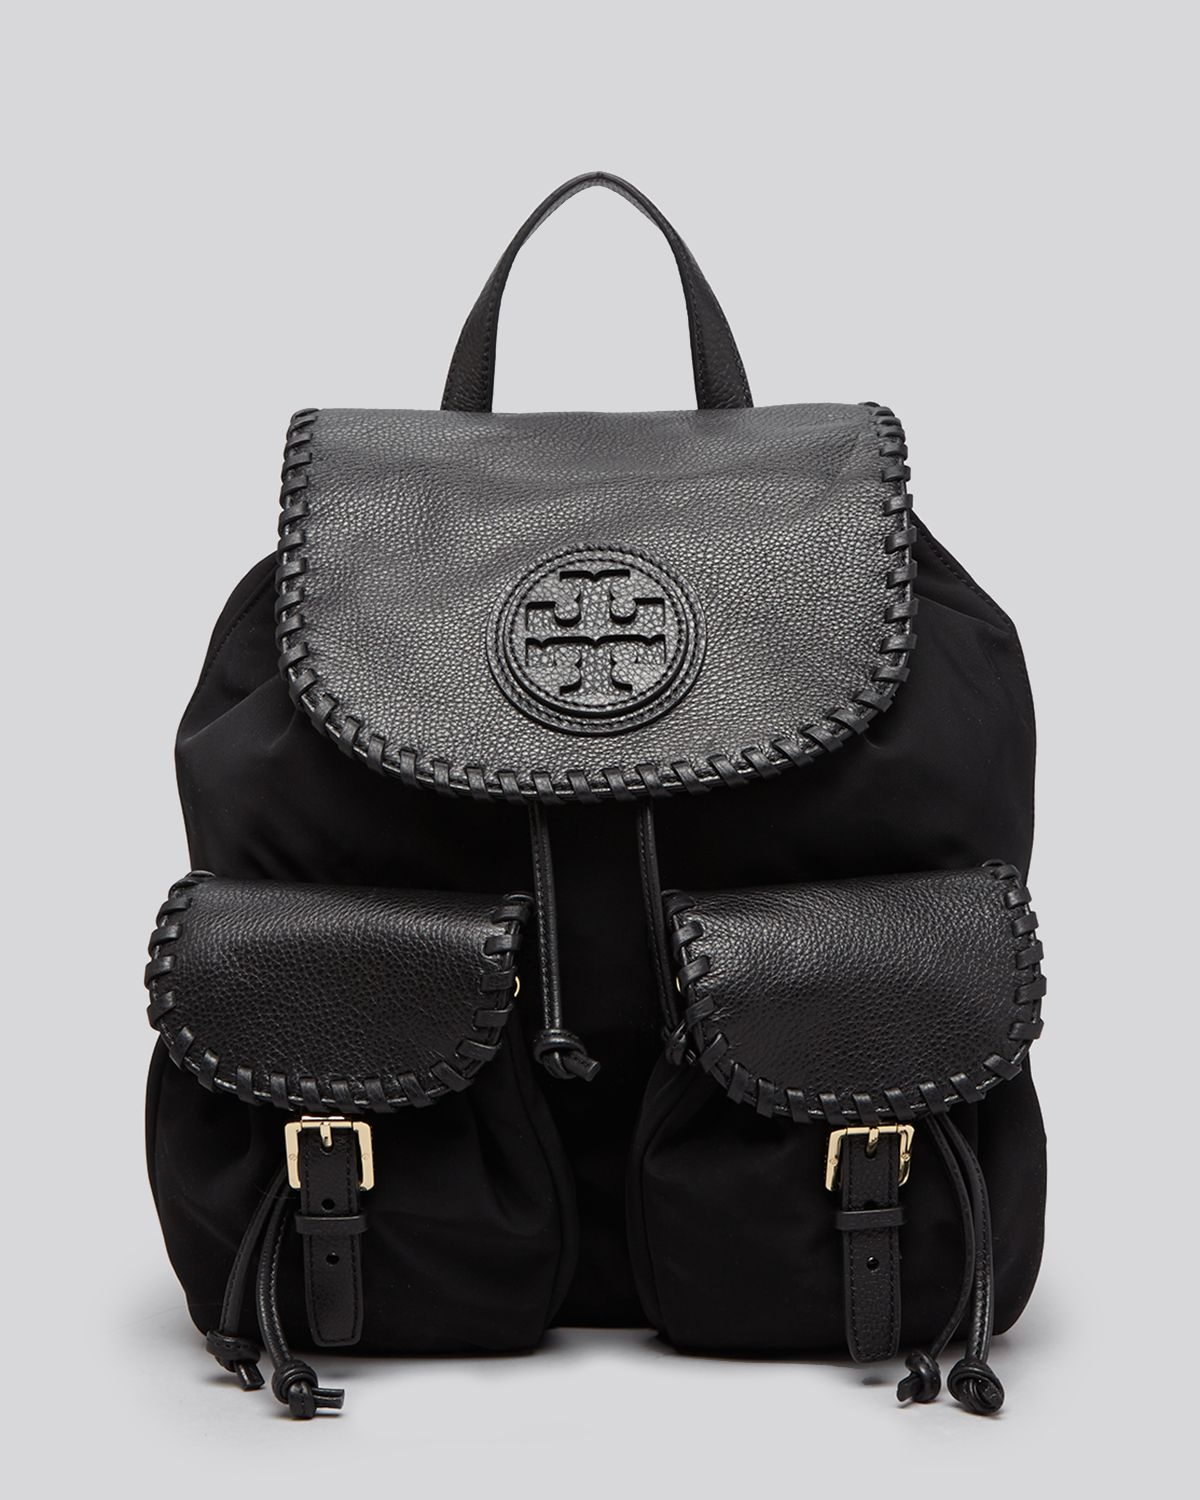 Tory burch Backpack - Marion Nylon in Black | Lyst